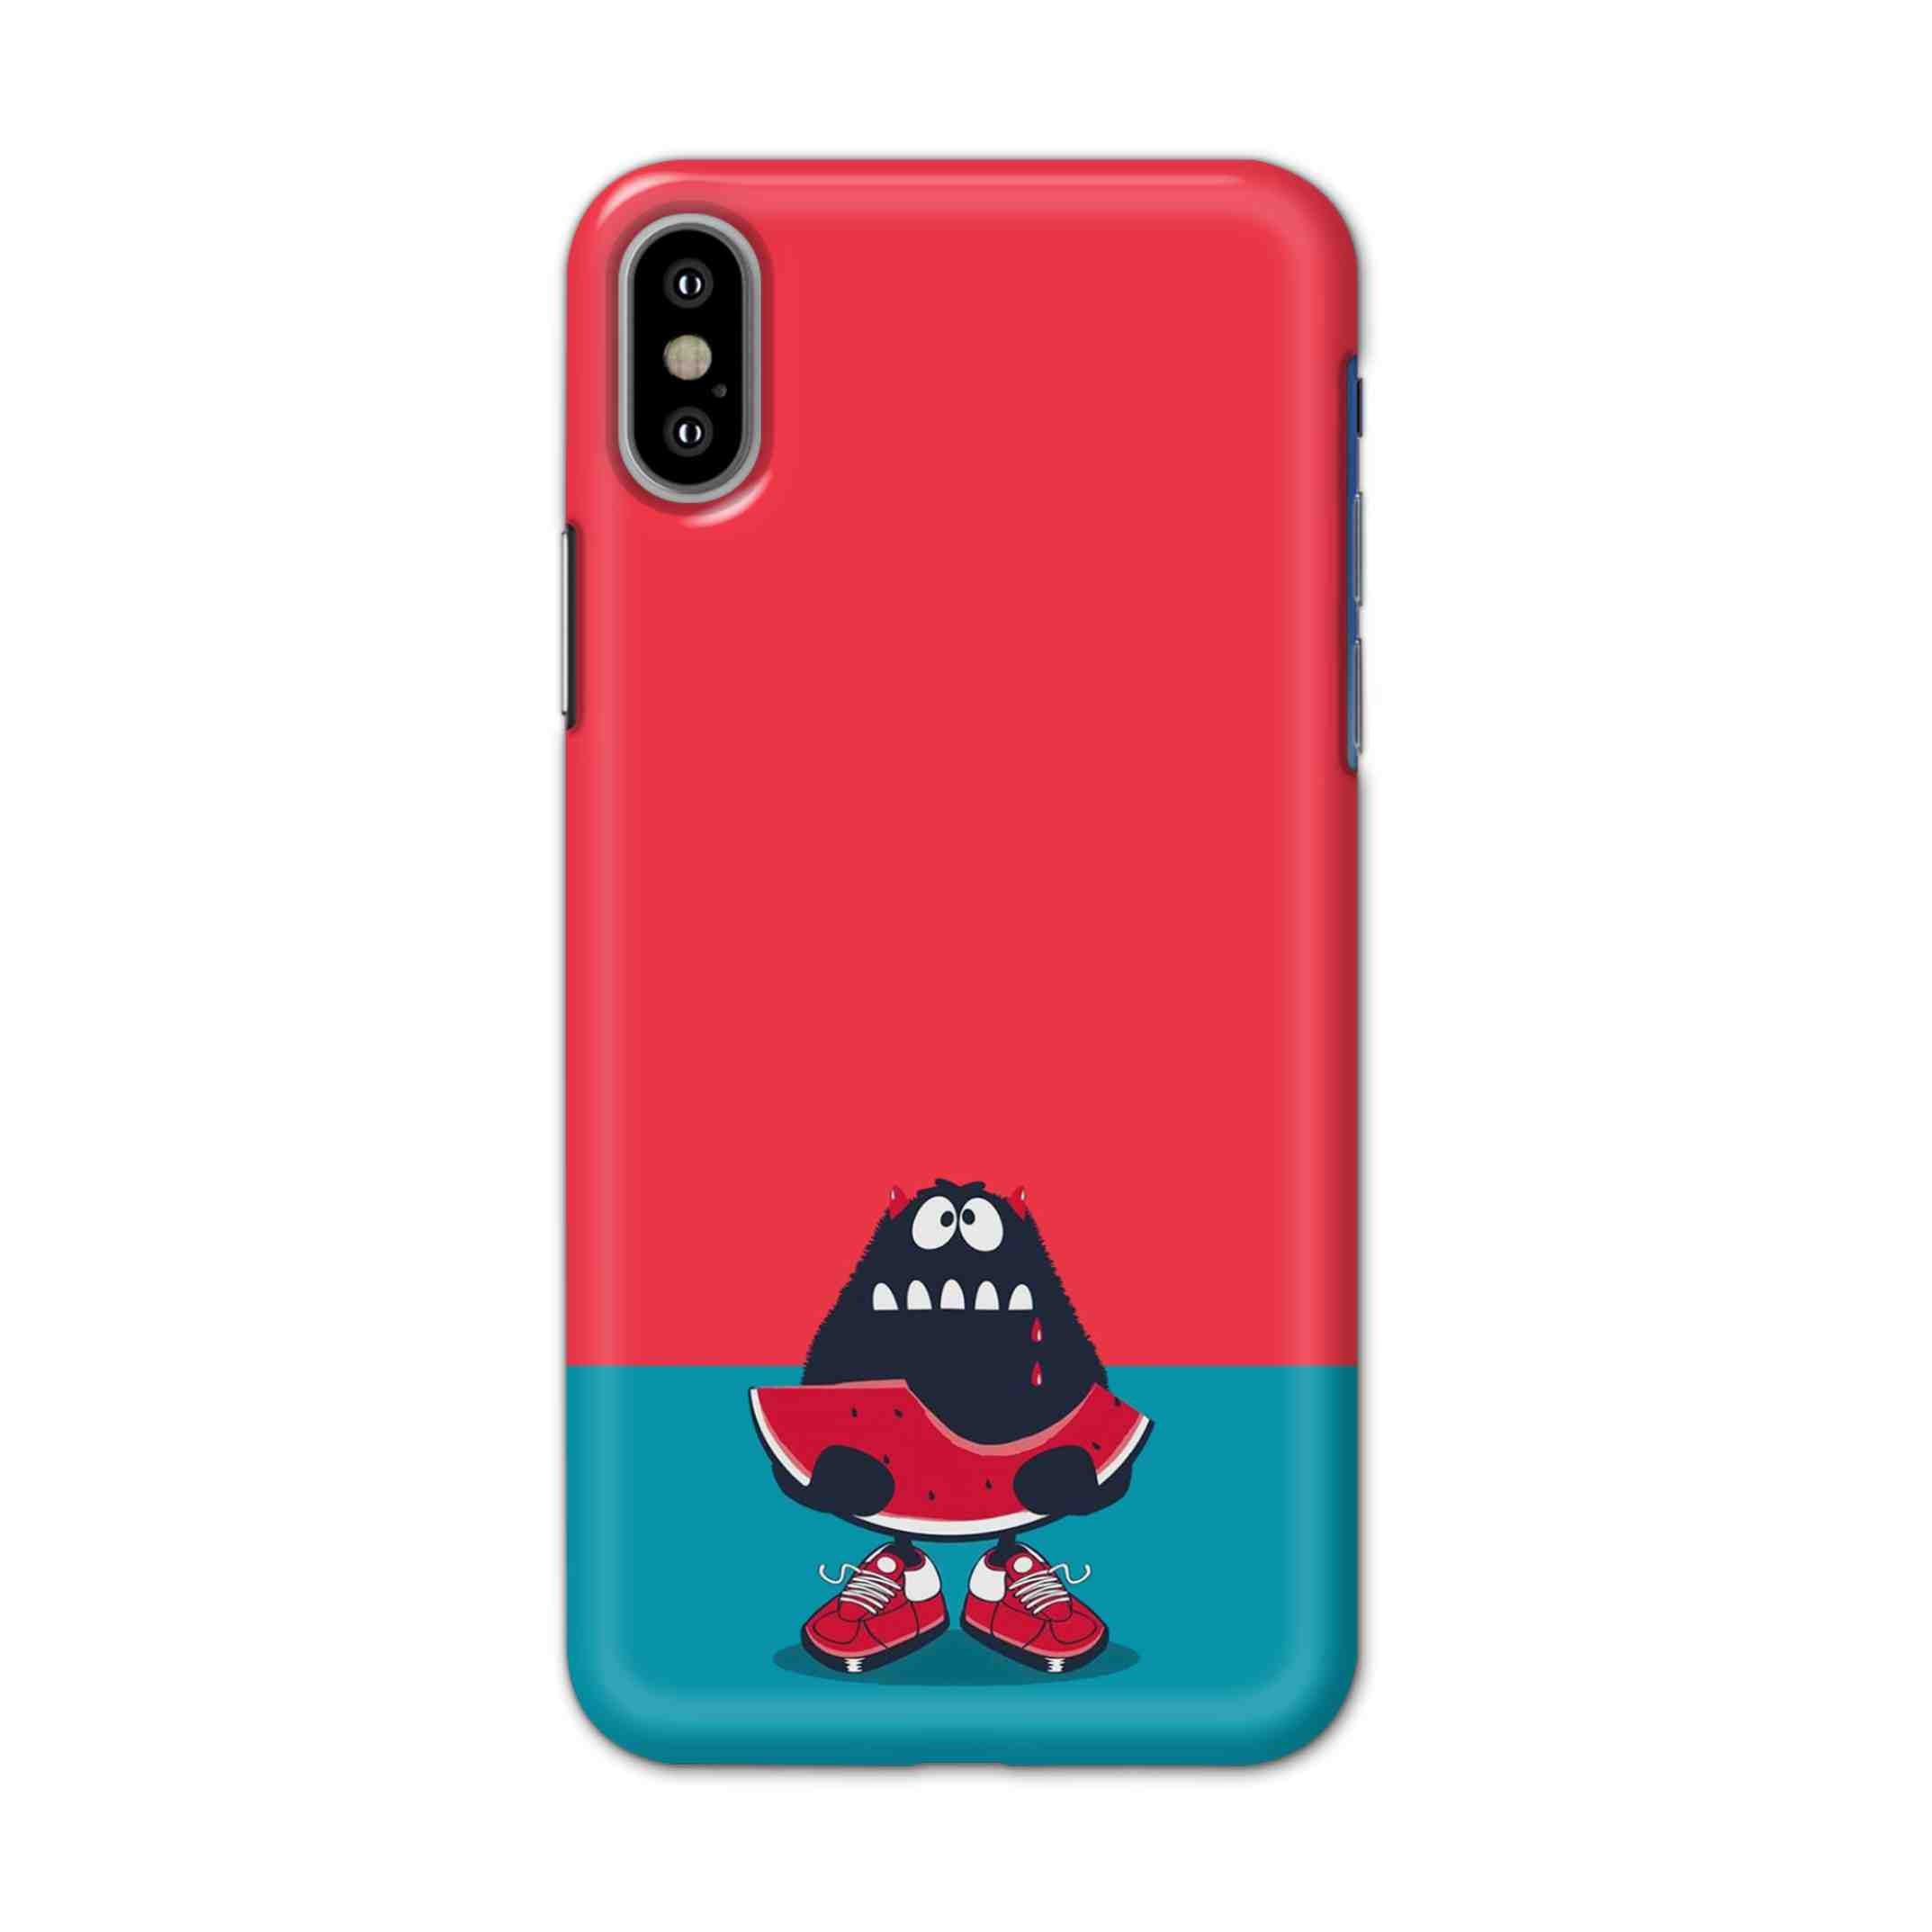 Buy Watermellon Hard Back Mobile Phone Case/Cover For iPhone X Online